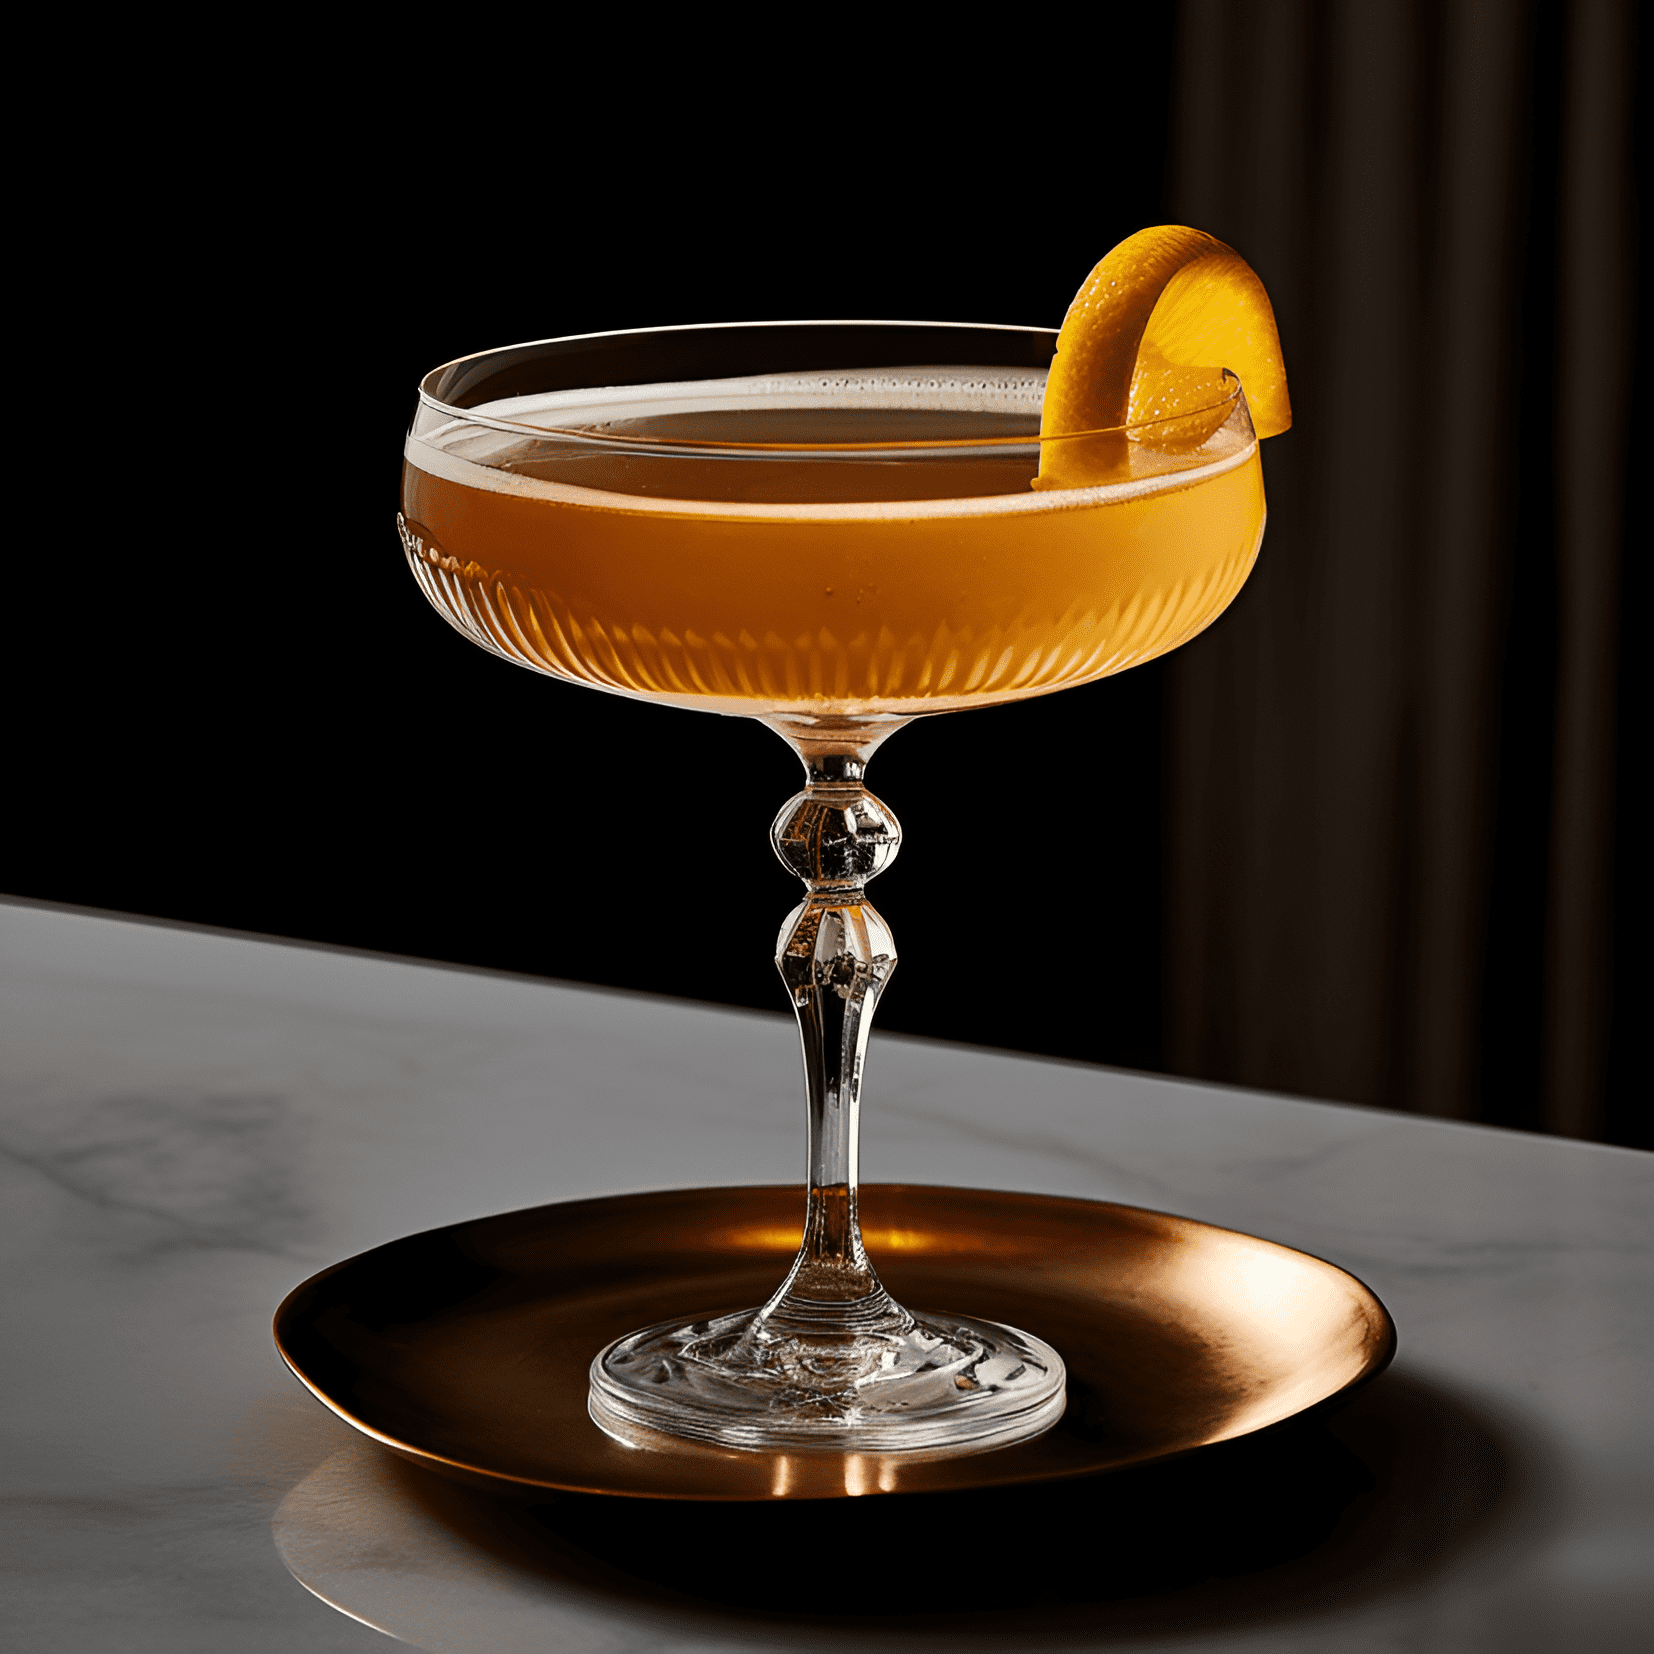 Spencer Cocktail Recipe - The Spencer Cocktail is a delightful mix of sweet, sour, and bitter flavors. It has a smooth, velvety texture with a hint of citrus and herbal notes. The overall taste is well-balanced and elegant.